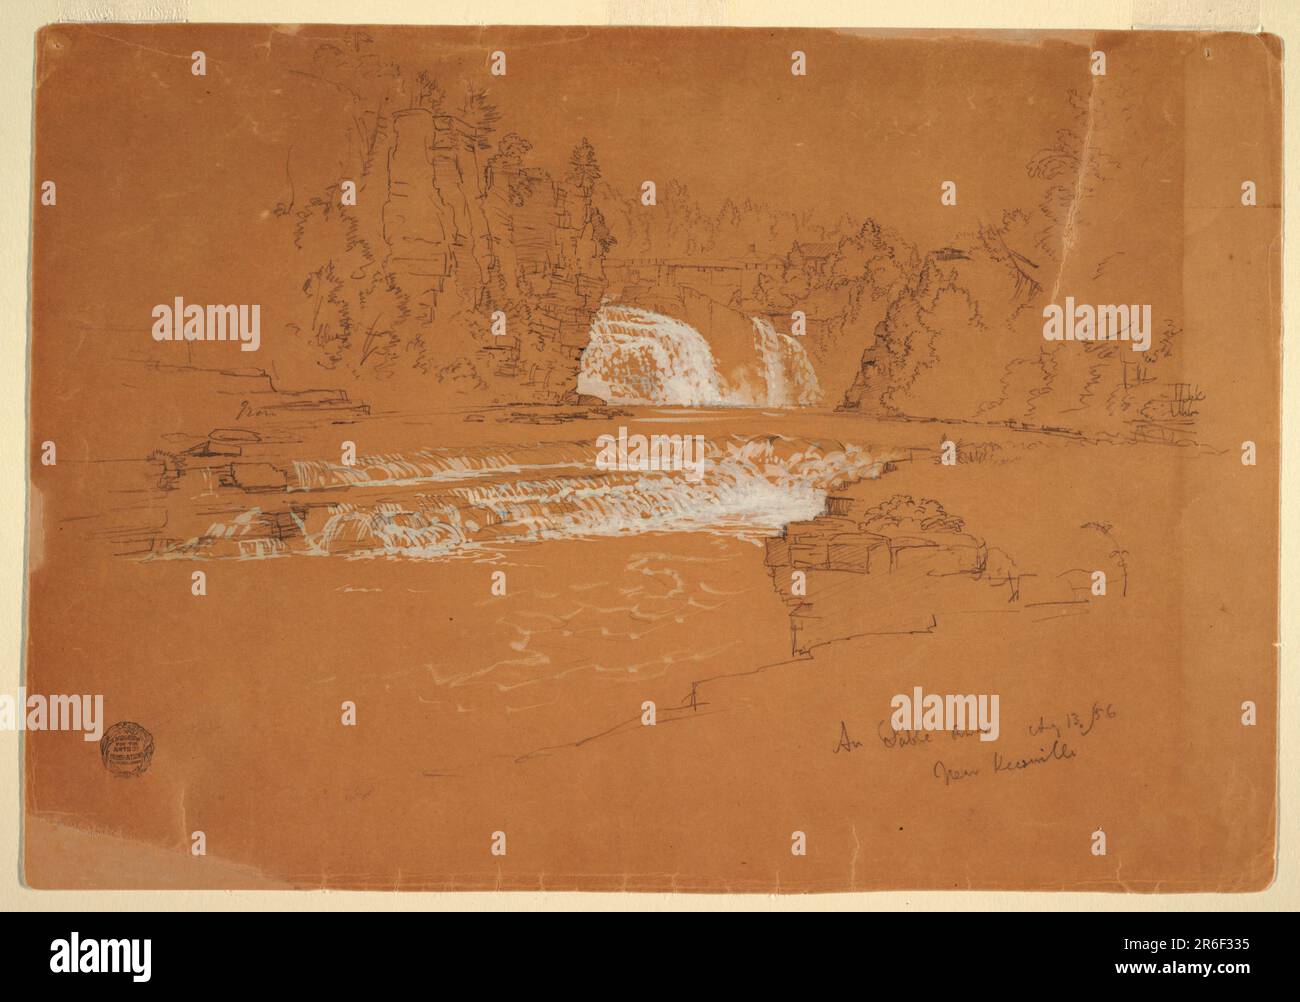 Horizontal view of the upper falls framed by sandstone walls in the central middleground, with the lower falls visible in the left center. Graphite, brush and white gouache on brown paper. Date: August 13, 1856. Museum: Cooper Hewitt, Smithsonian Design Museum. Stock Photo